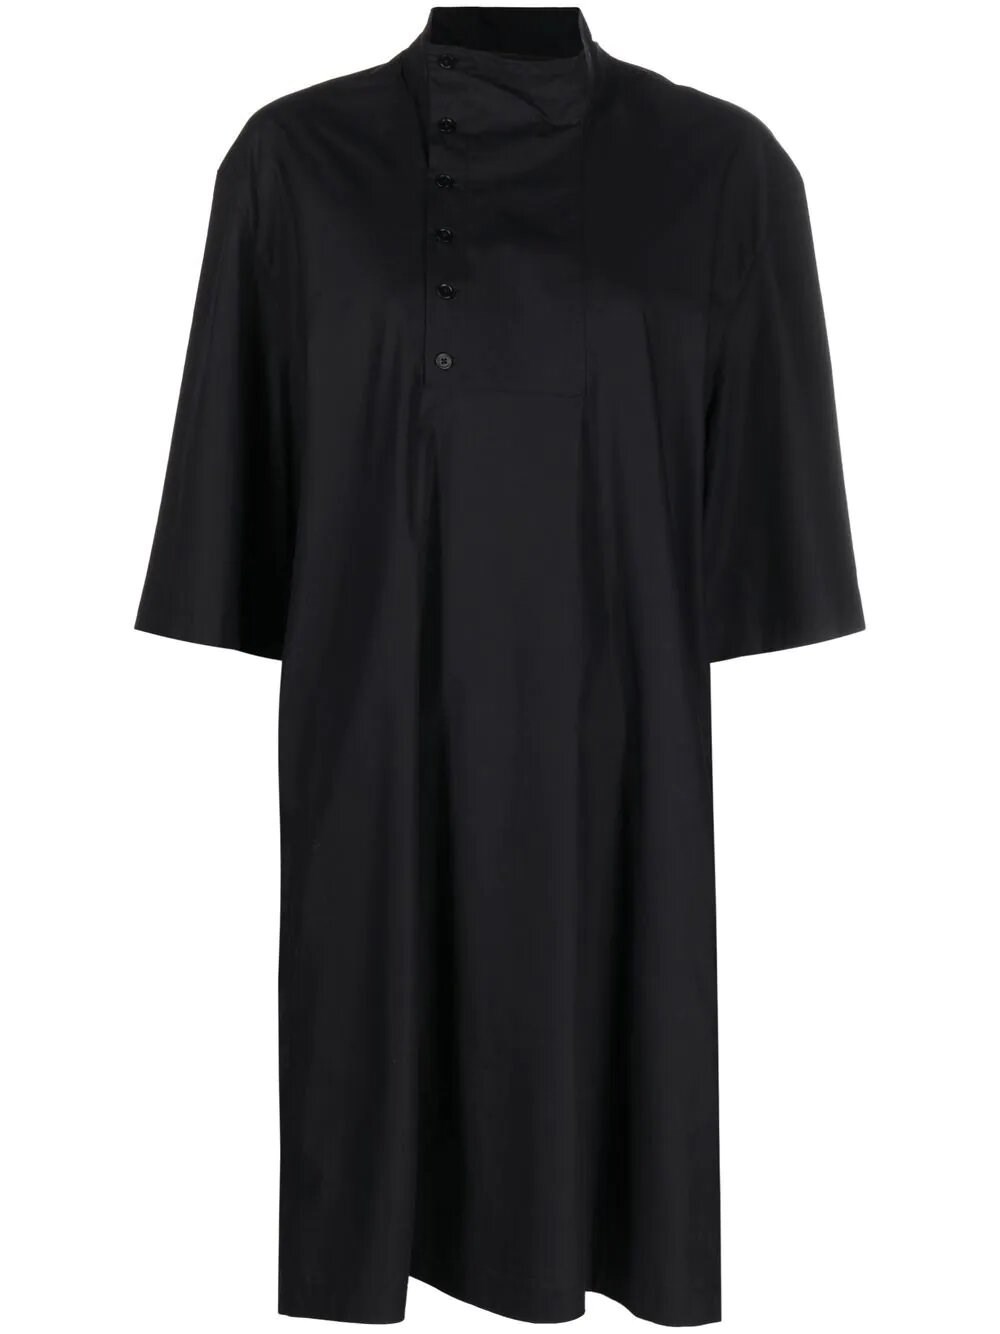 LEMAIRE TUNIC DRESS